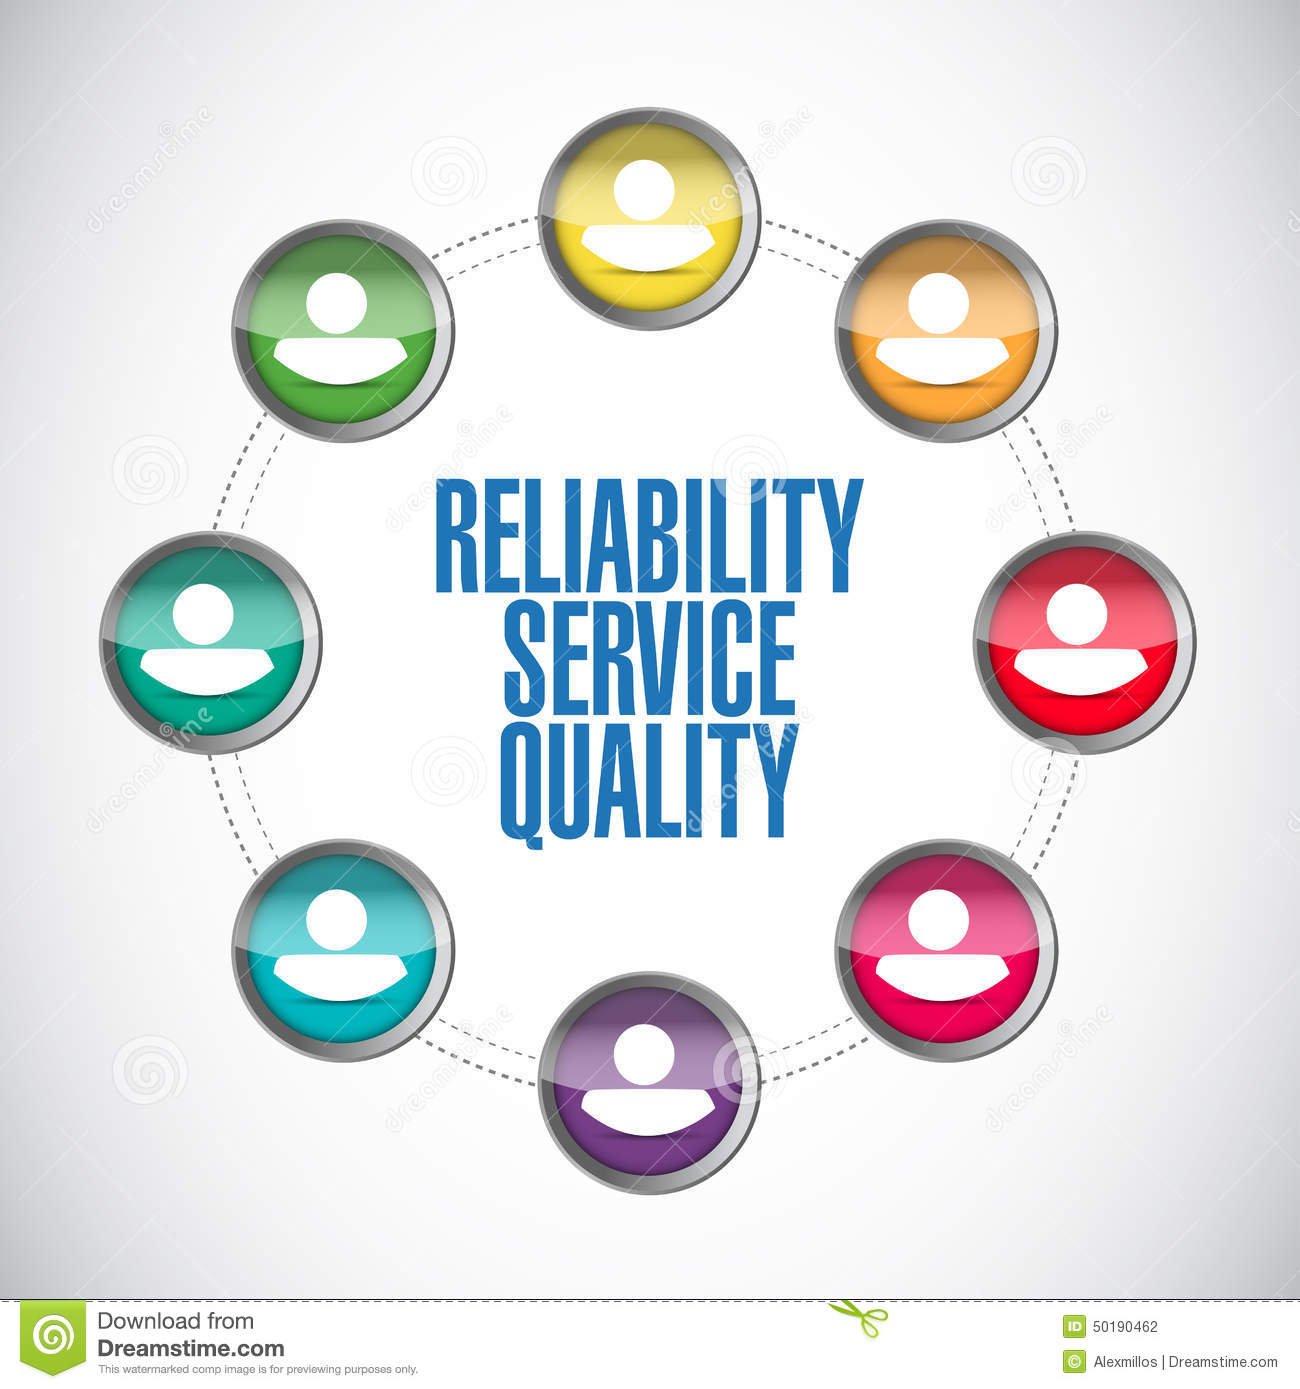 reliability-service-quality-people-network-illustration-design-over-white-background-50190462.jpg